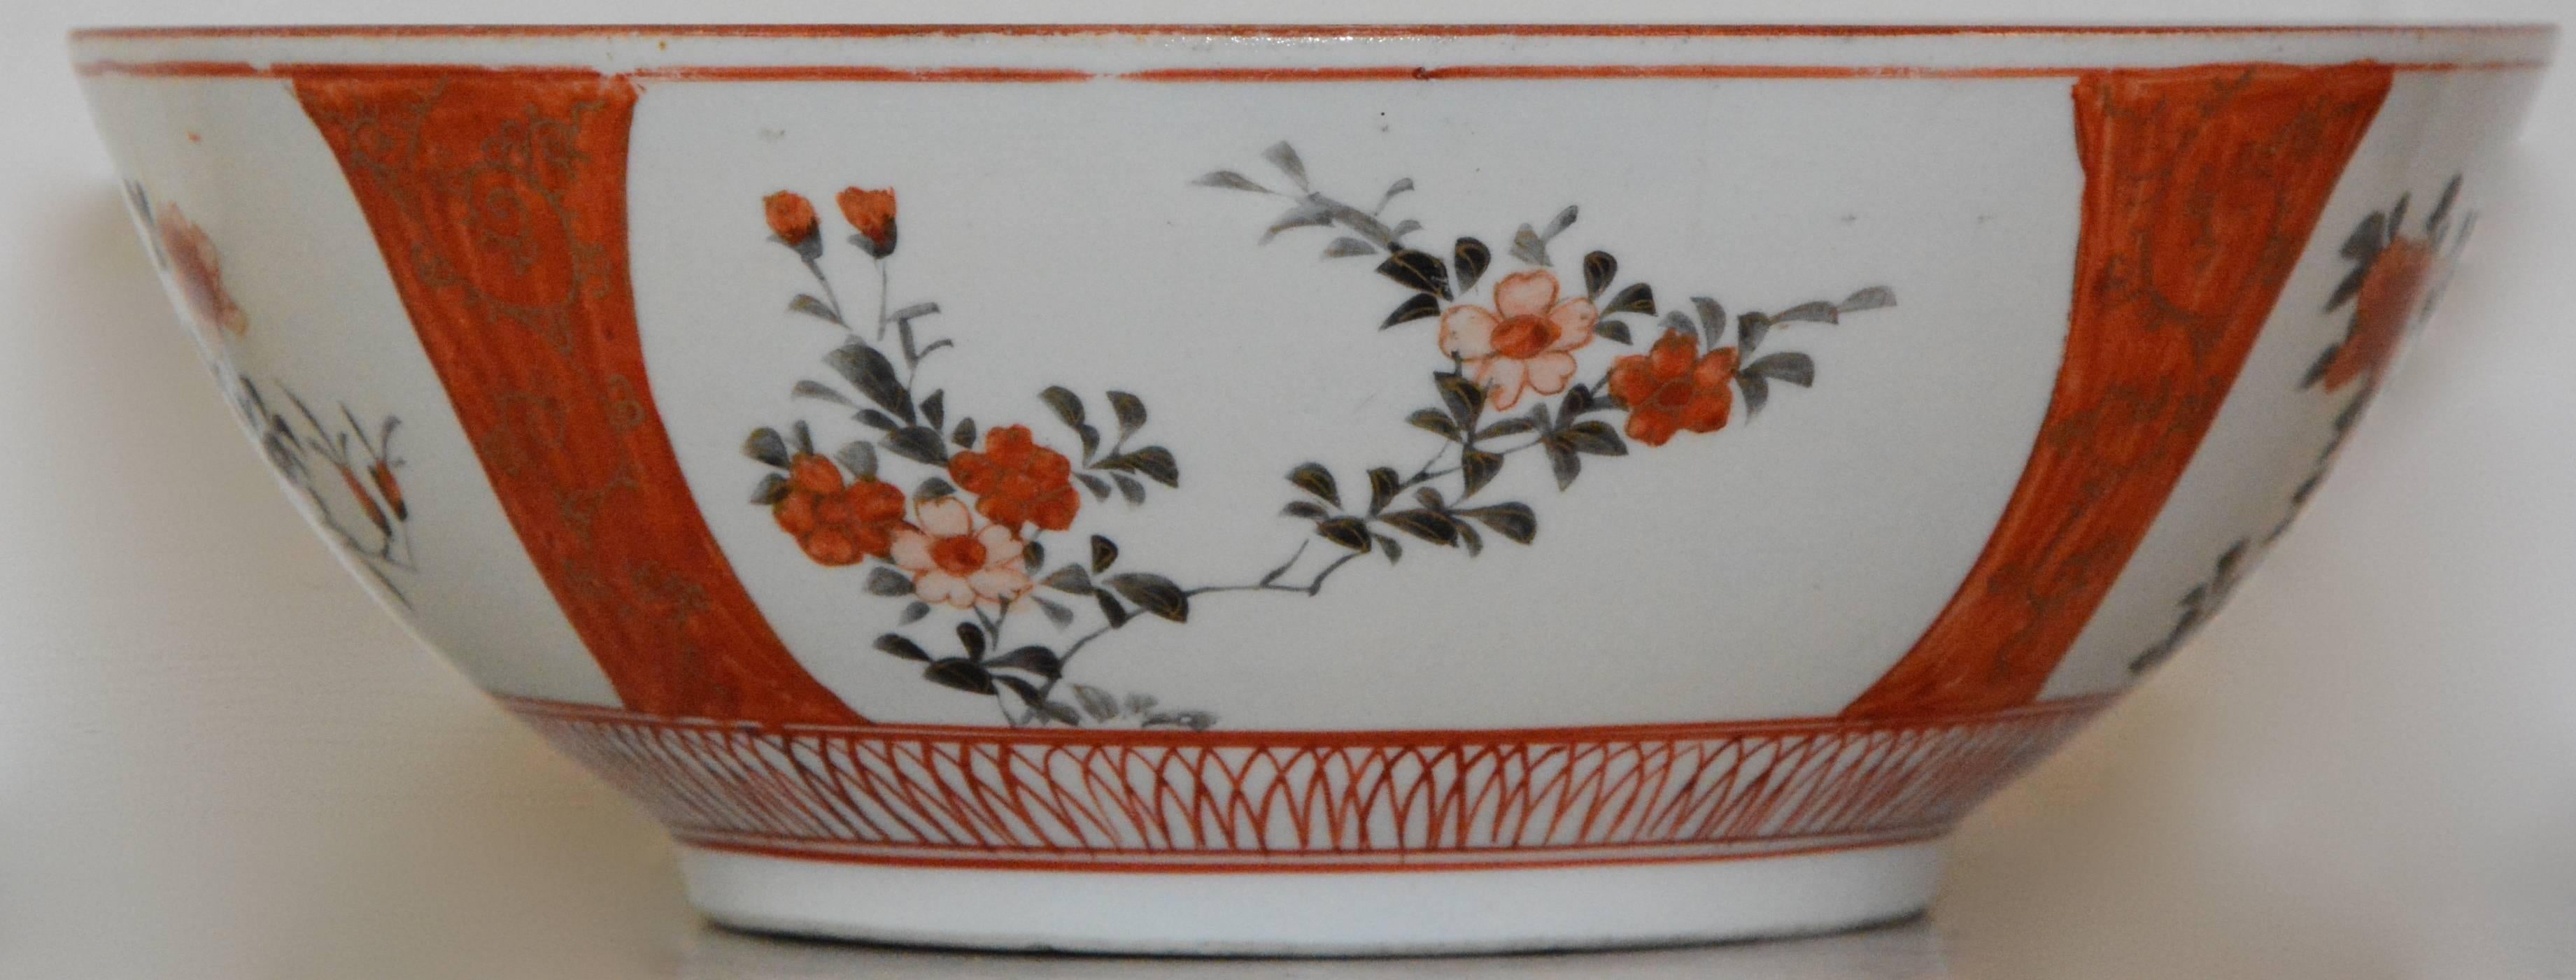 Chinese Export Asian Bowl with Floral Motif For Sale